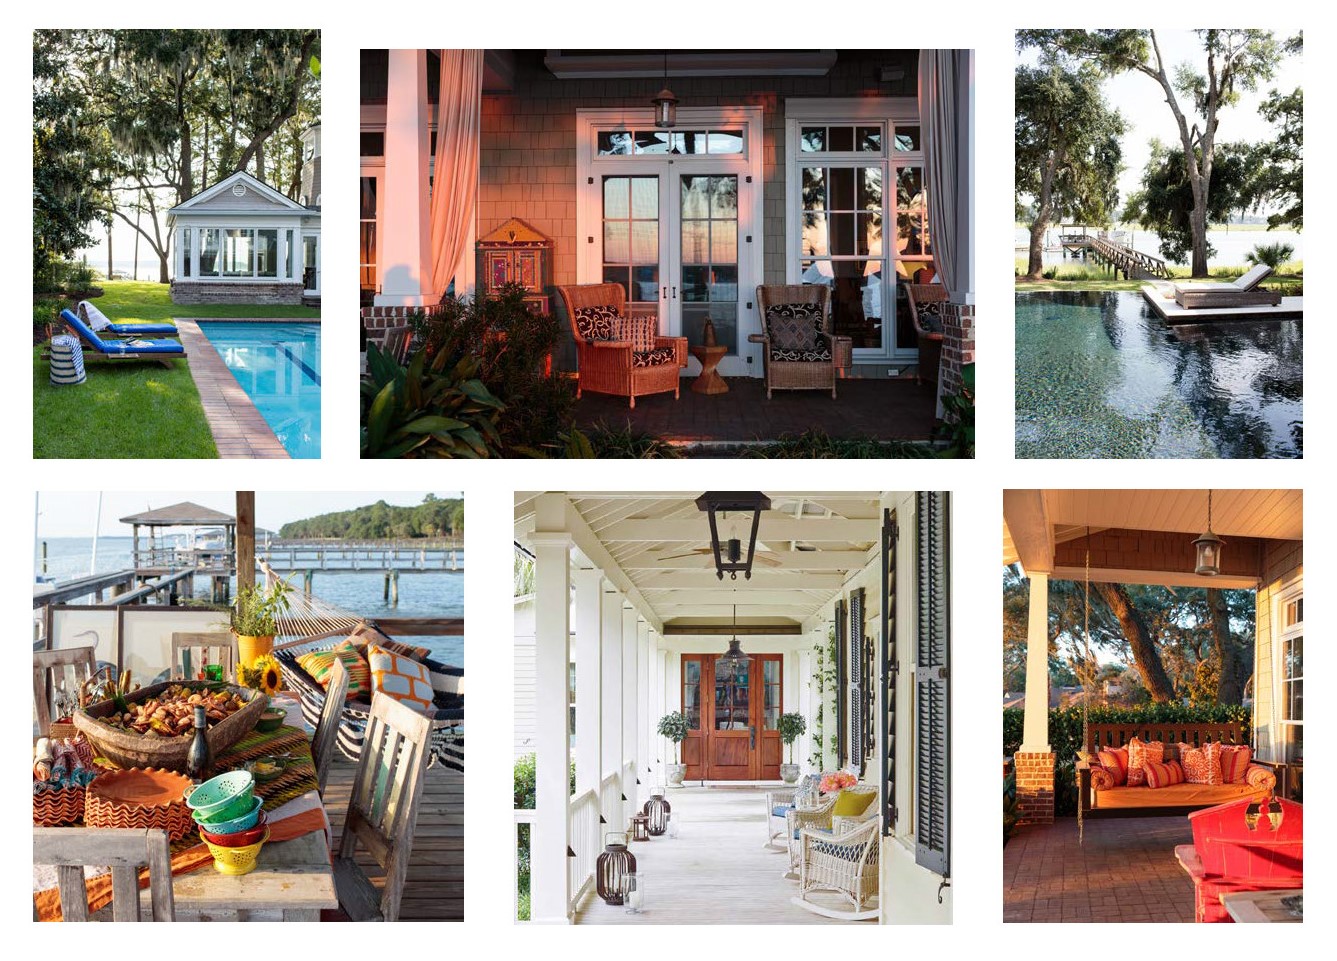 A collage of outdoor spaces in a lowcountry setting exemplifying the indoor-outdoor lifestyle of Palmetto Bluff and the Low country